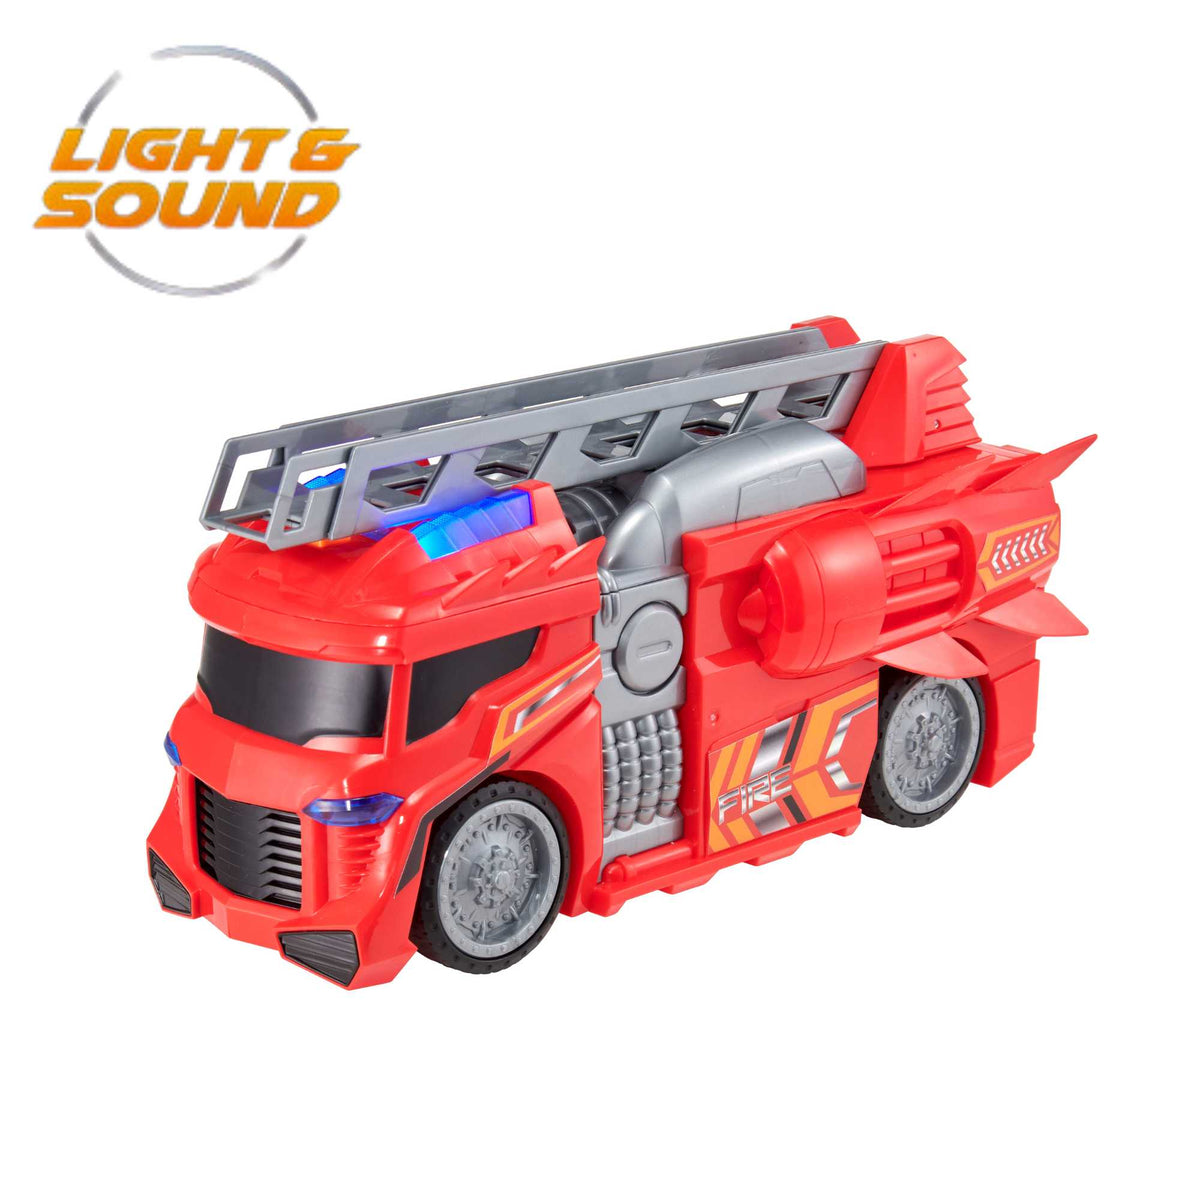 Teamsterz Mean Machines Light And Sound Fire Engine